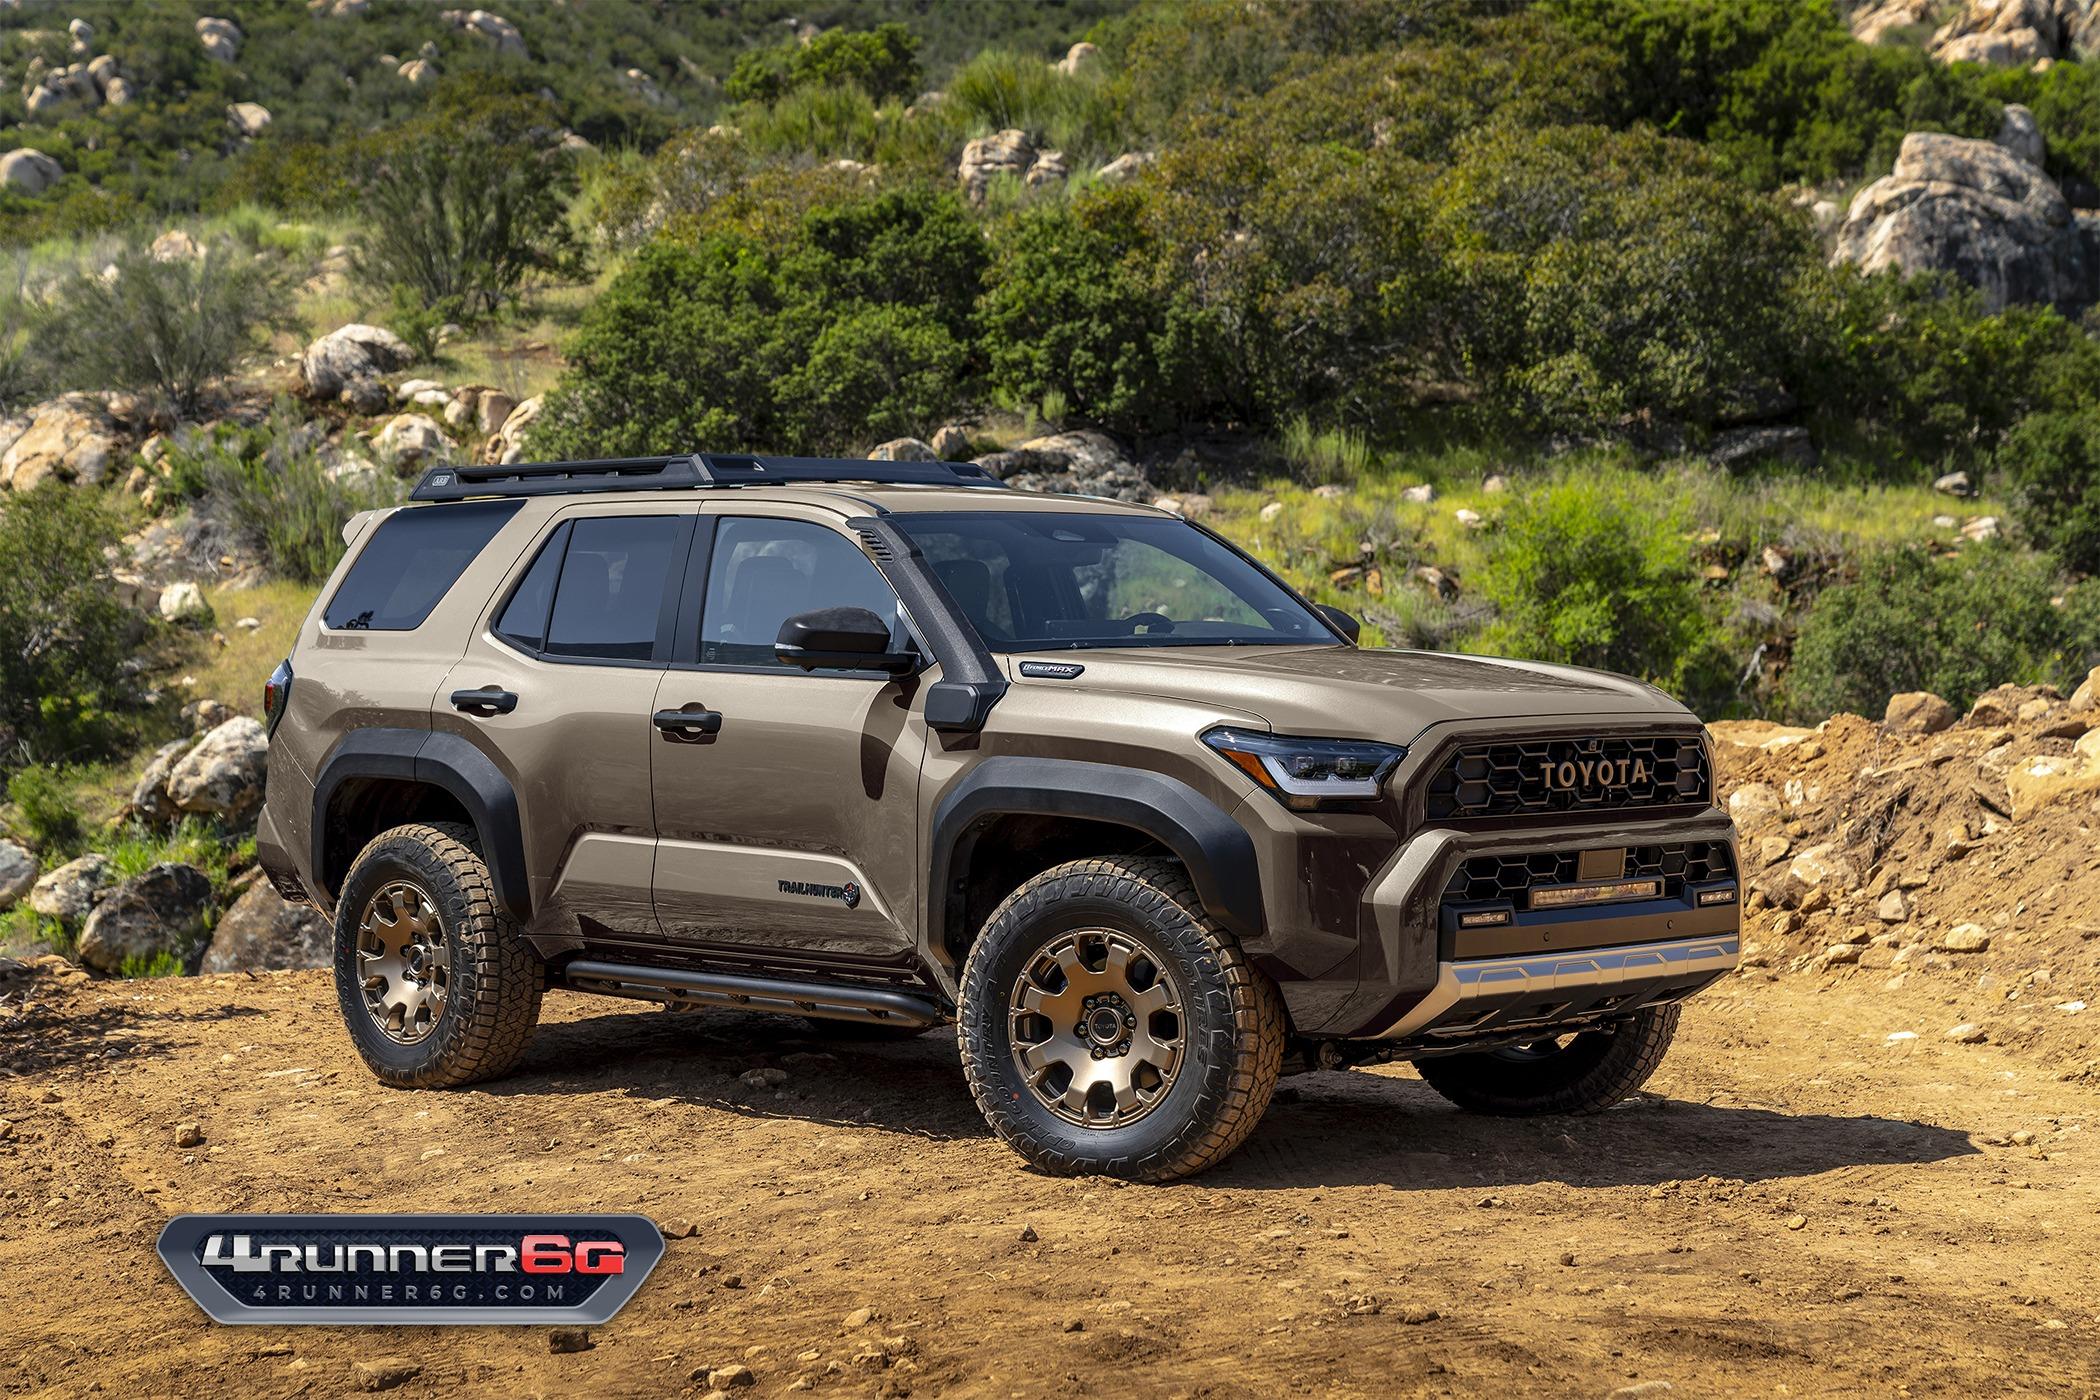 2025 Toyota 4runner Trailhunter 6th Gen 4Runner (Everest color) spotted in the wild trailhunter-bronze-oxide-front-